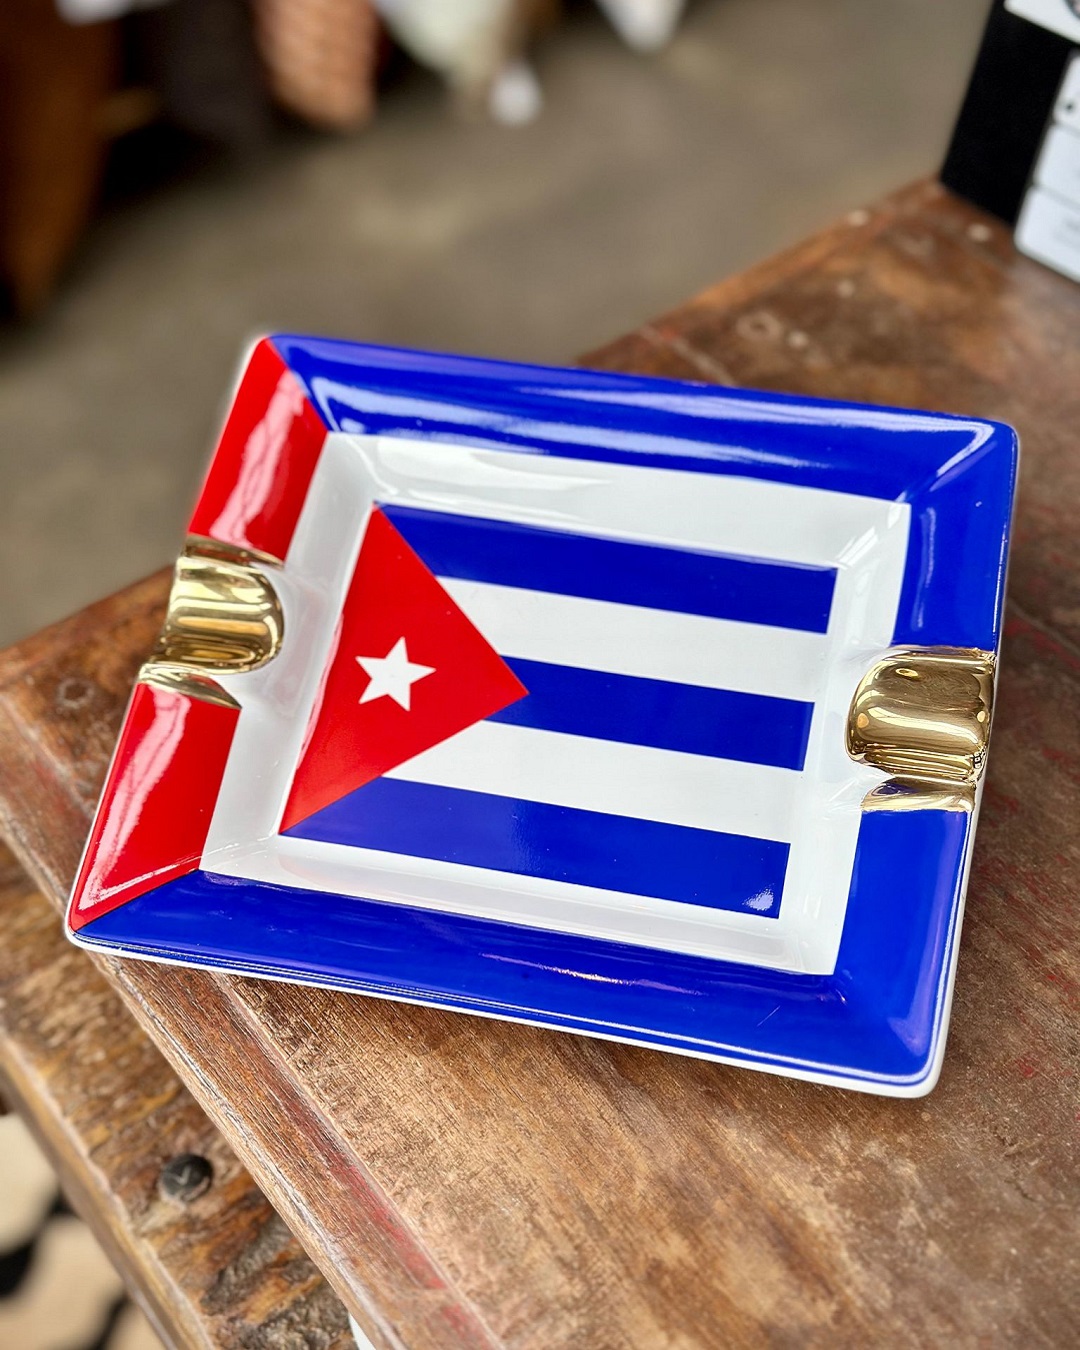 Cuban flag ashtray in blue red and gold